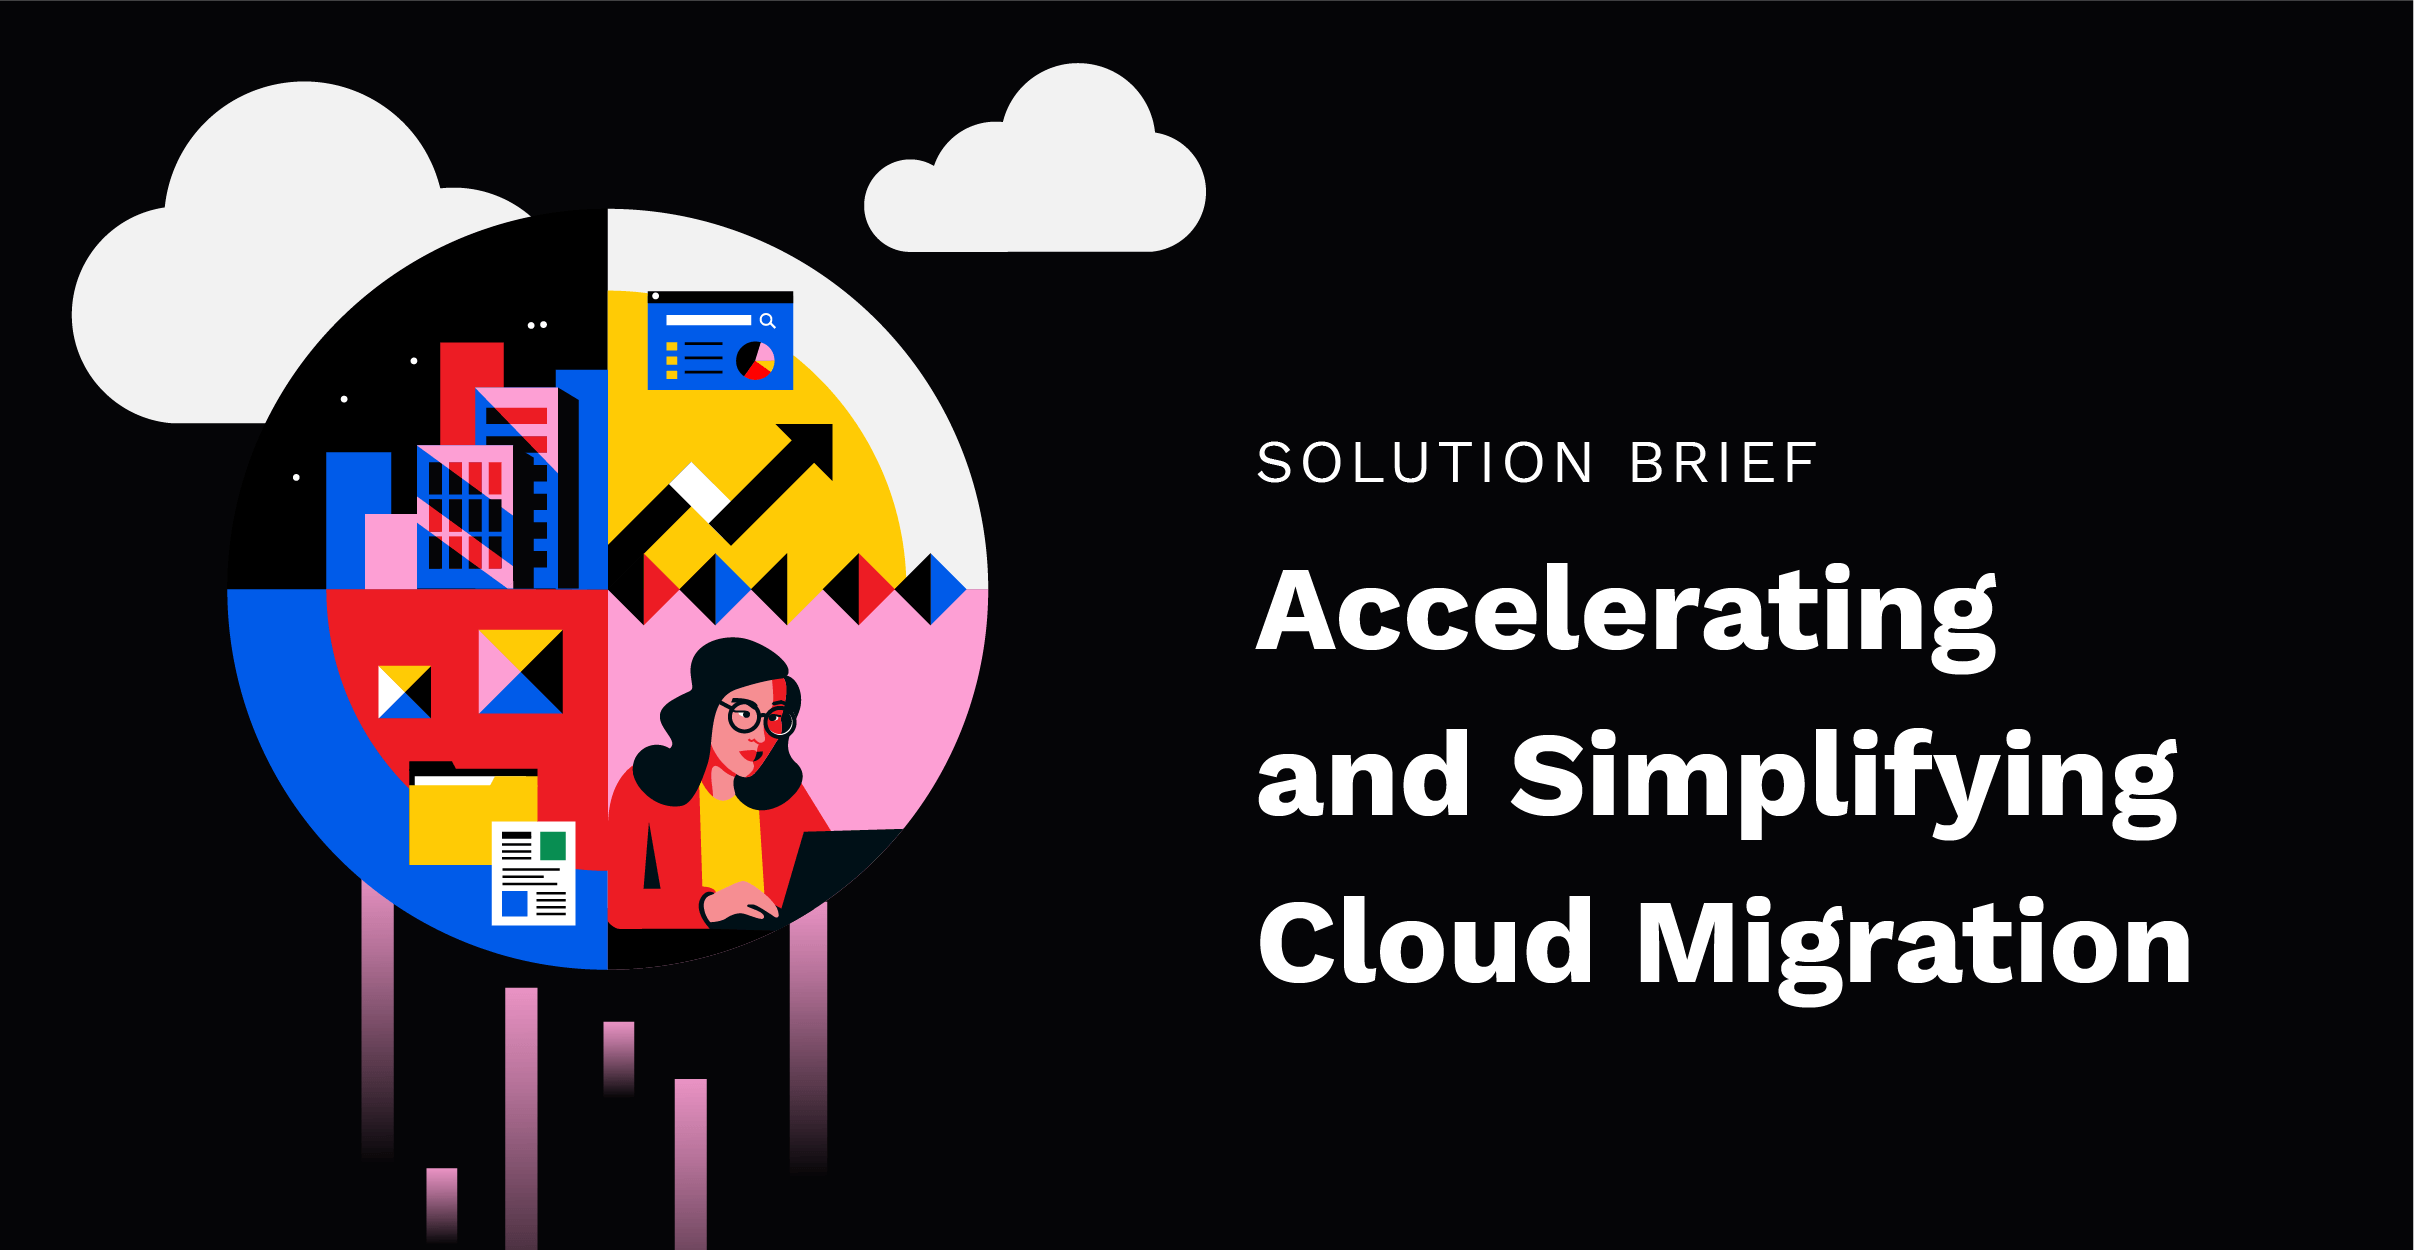 Solution brief – Accelerating and Simplifying Cloud Migration